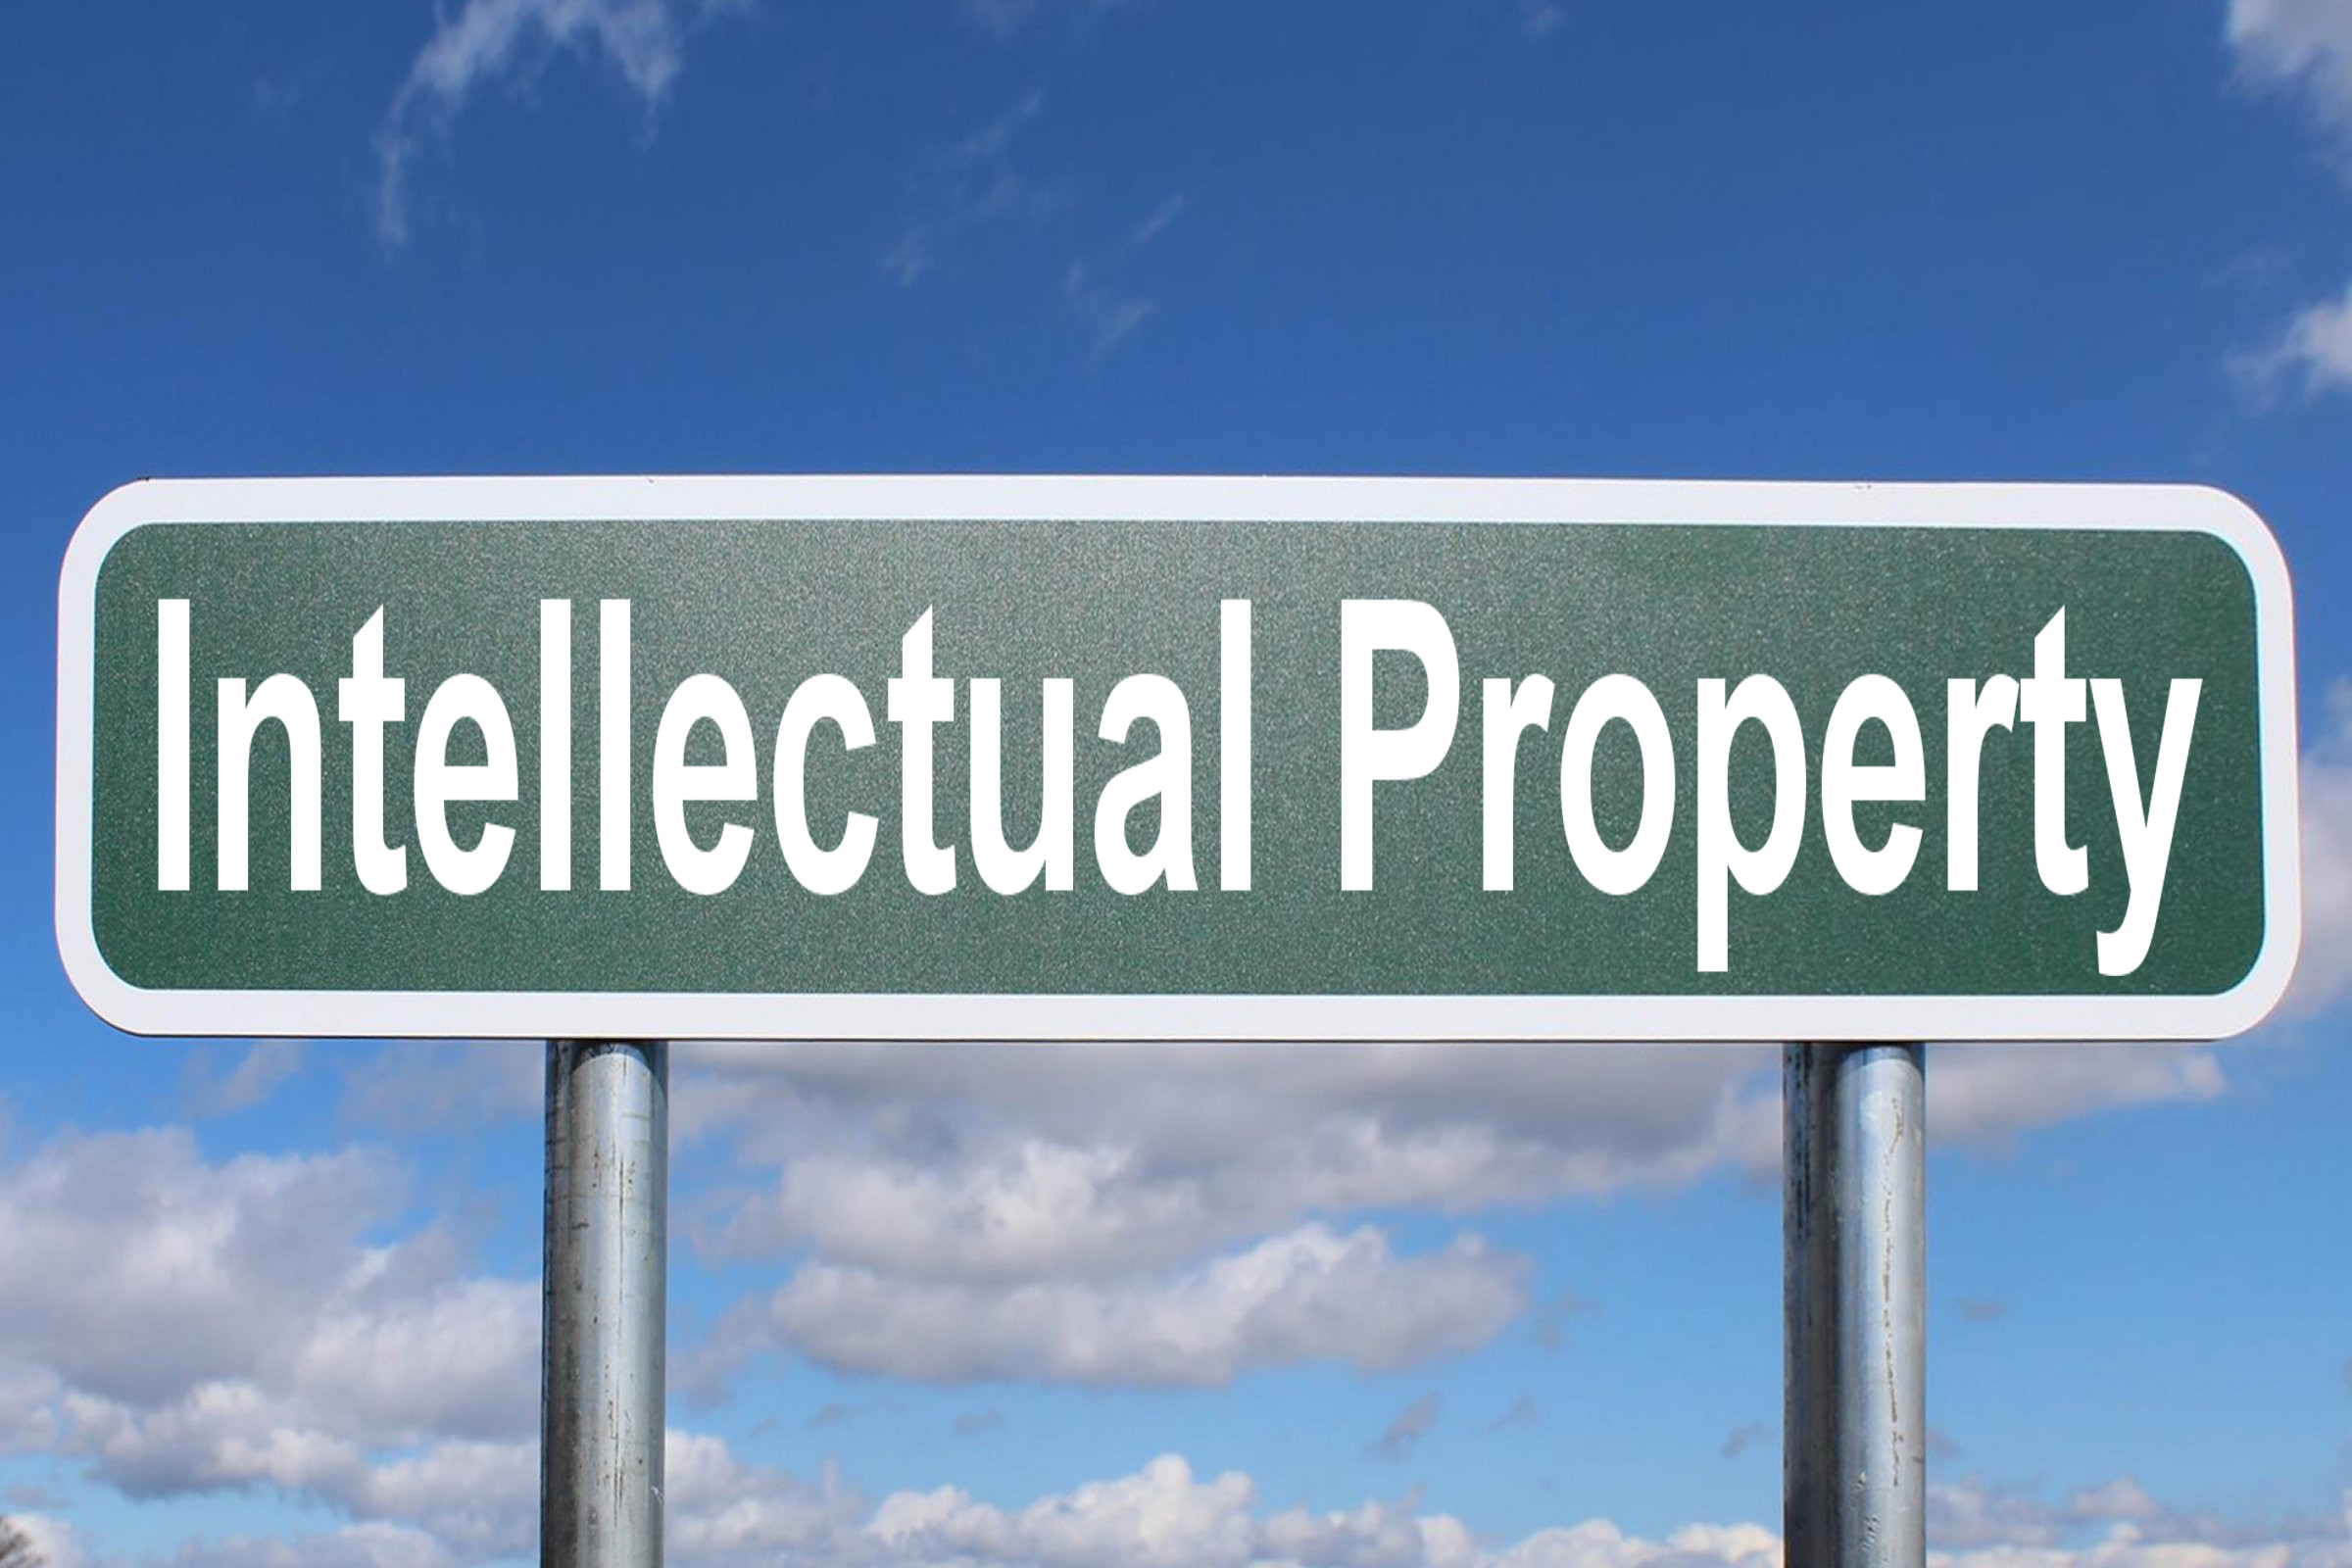 Intellectual Property Free of Charge Creative Commons Highway sign image